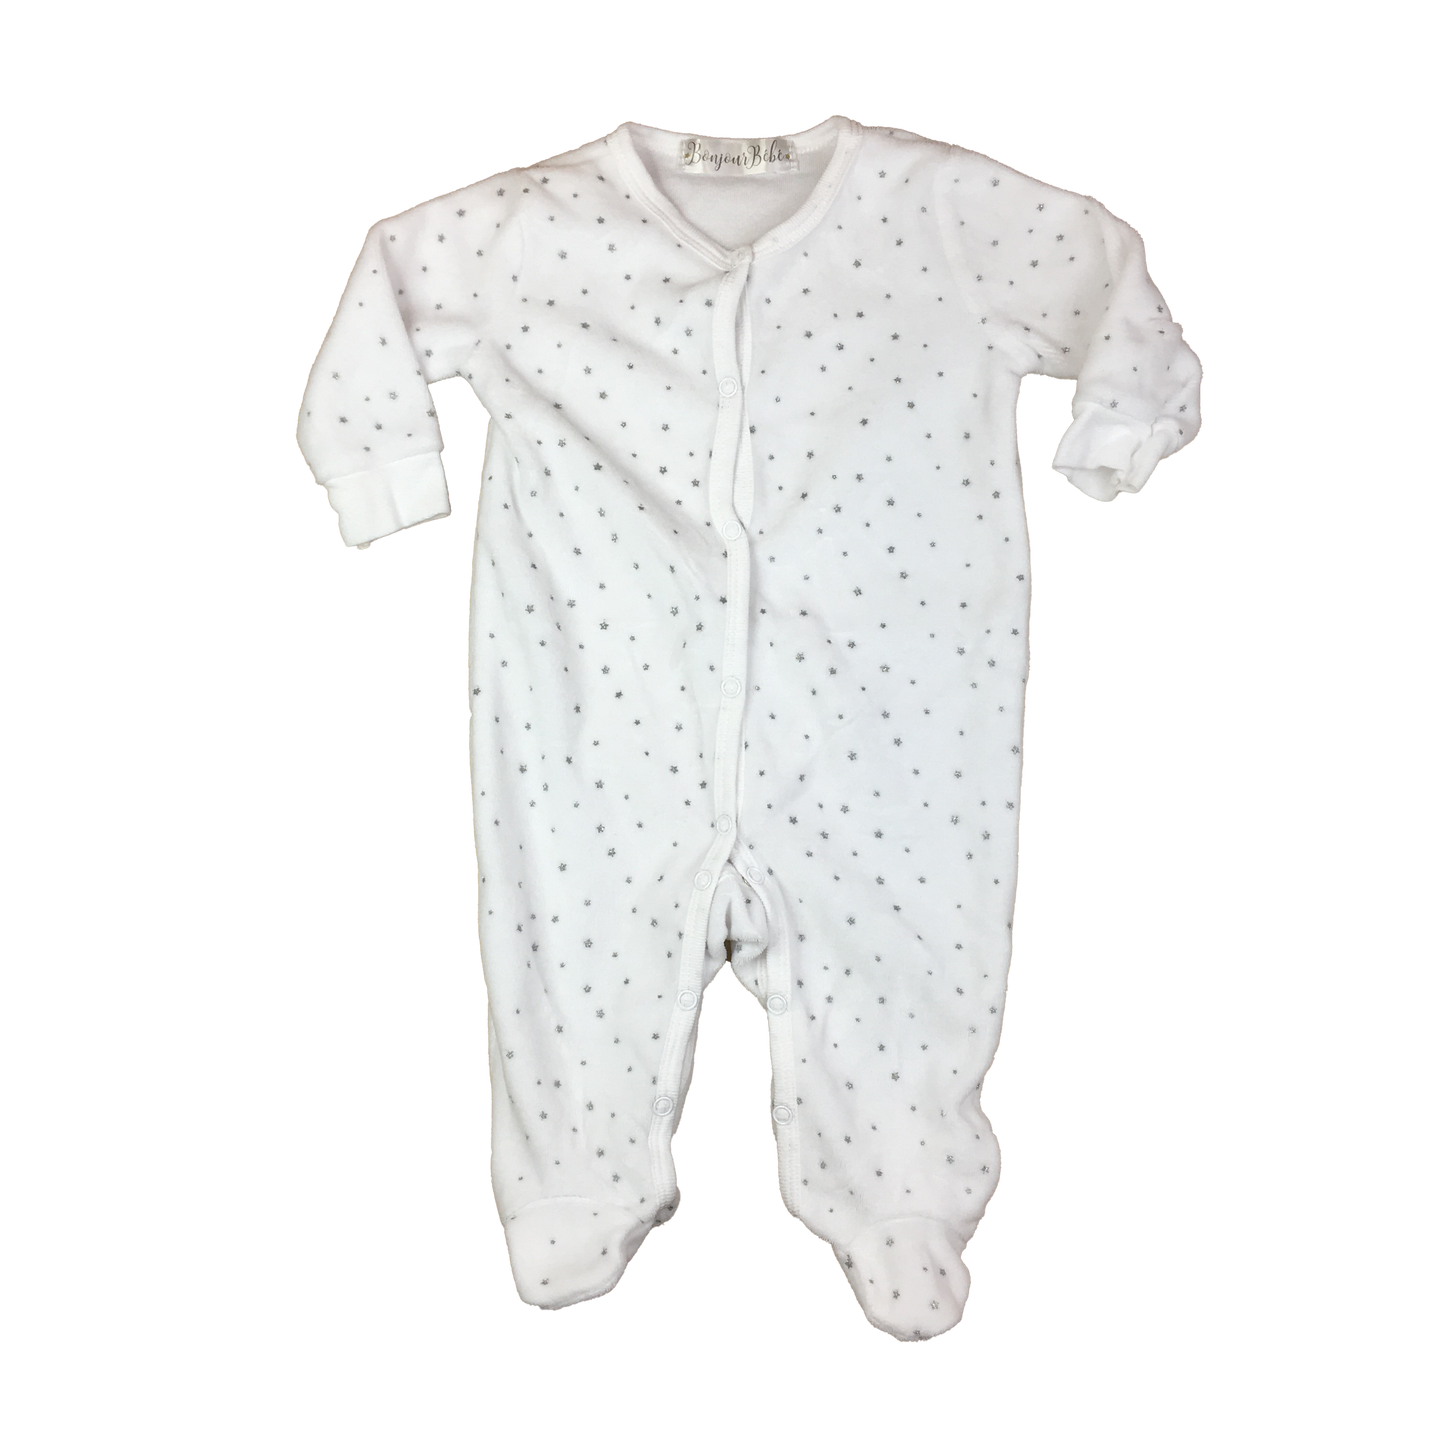 Bonjour Bebe White Footed Sleeper with Silver Polka Dots 3-6M